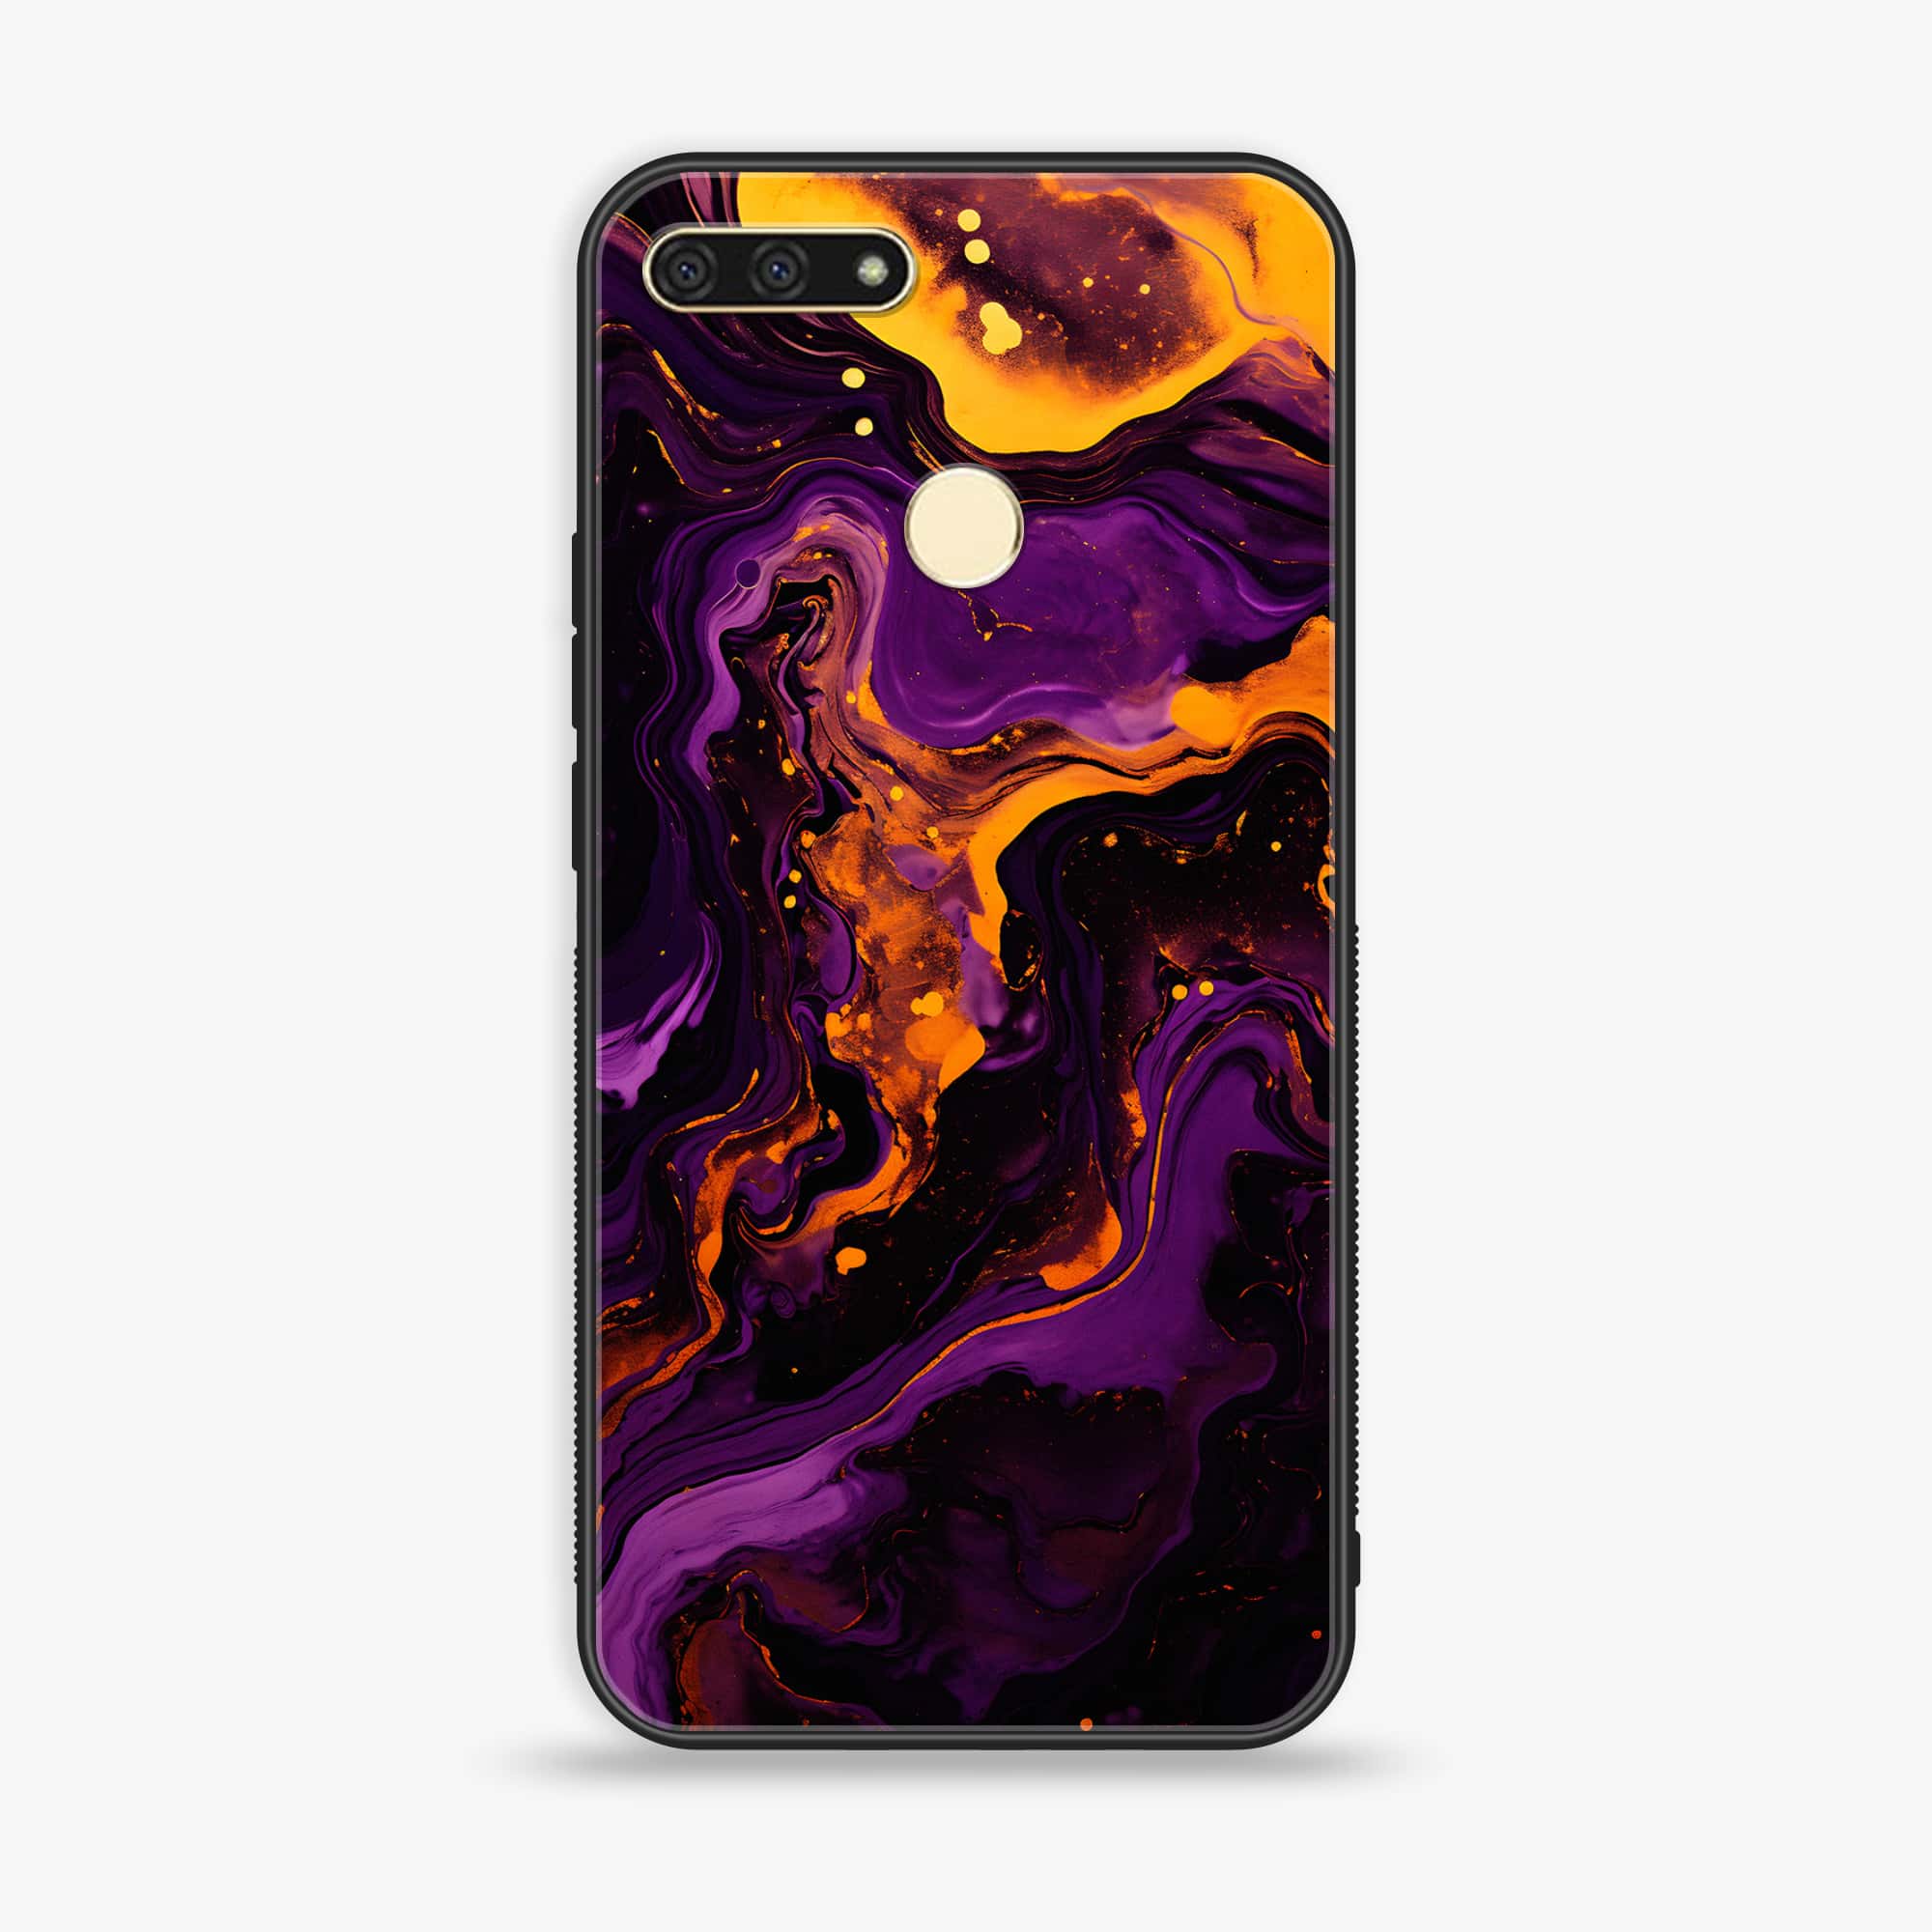 Huawei Y6 2018/Honor Play 7A - Liquid Marble 2.0 Series - Premium Printed Glass soft Bumper shock Proof Case